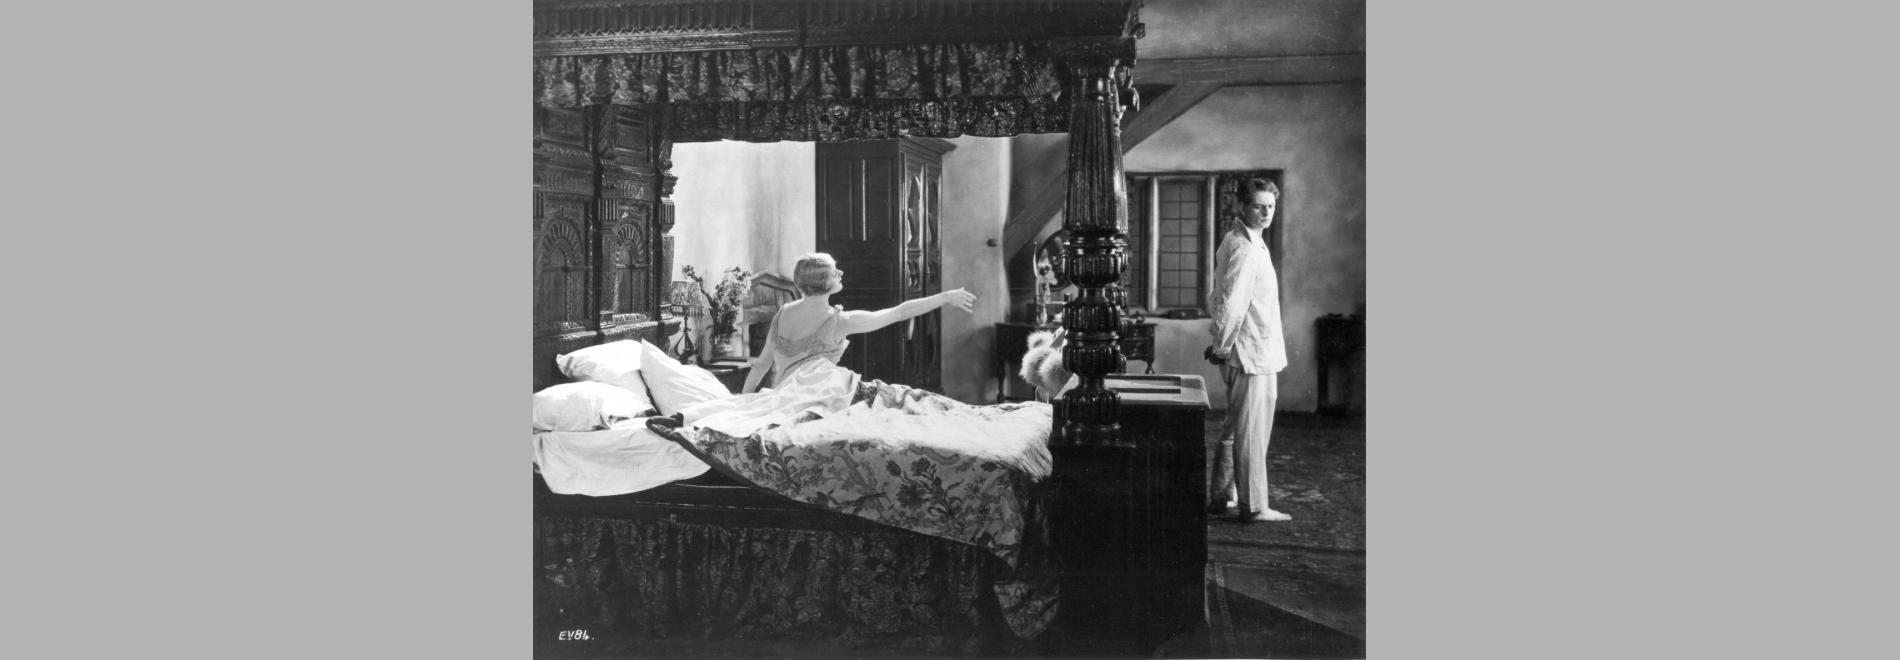 Easy Virtue (Alfred Hitchcock, 1927)